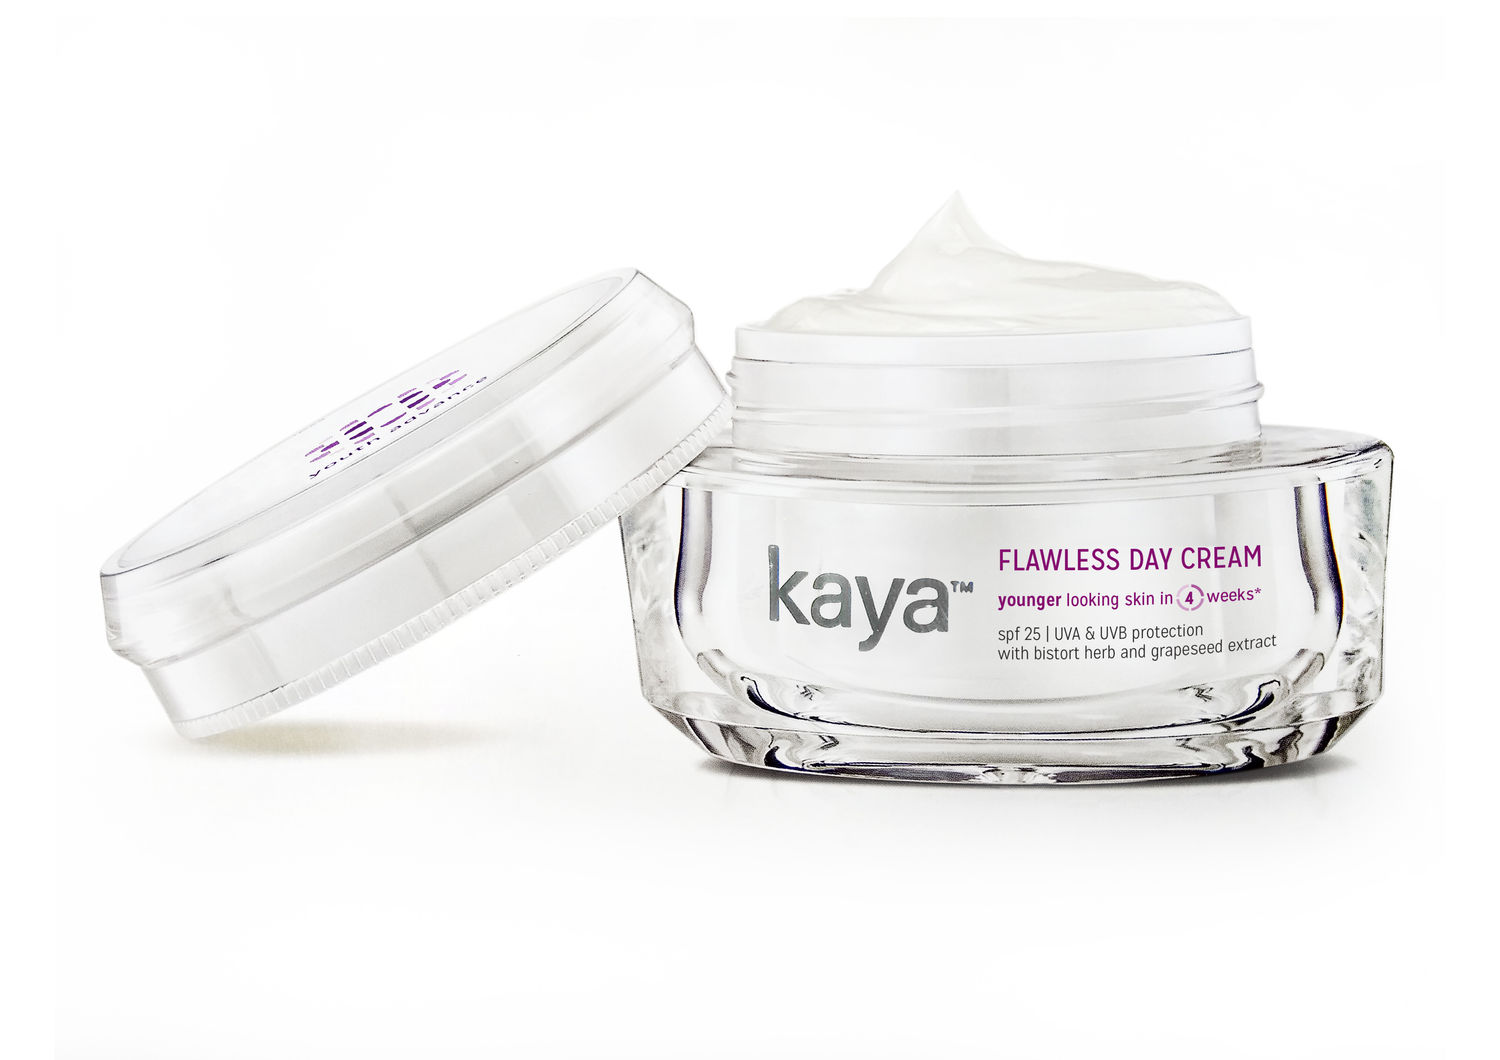 Buy Kaya Flawless Day Cream Daily moisturizer with SPF 25 4 Star Boots Rating Protects skin from fine lines age spots 50g - Purplle